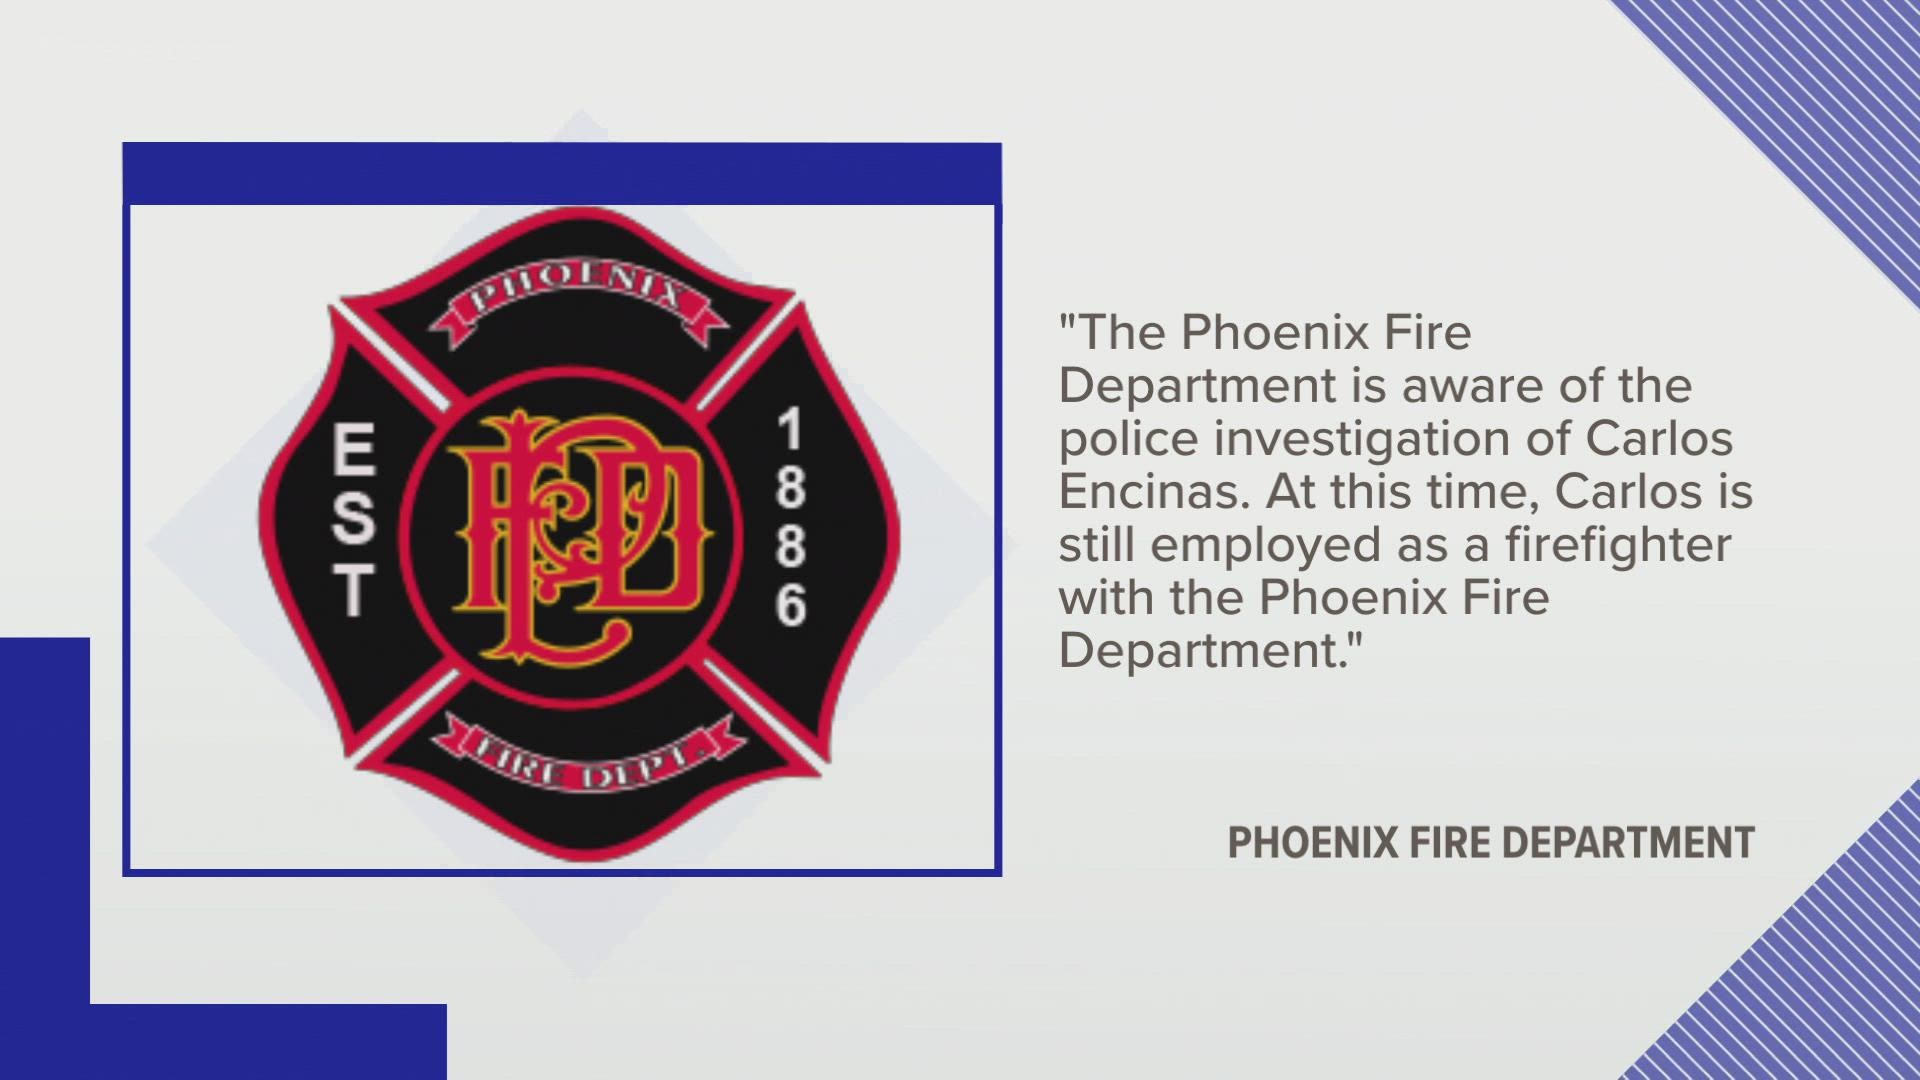 A member of the Phoenix Fire Department is accused of sexually assaulting a woman after a night with friends.